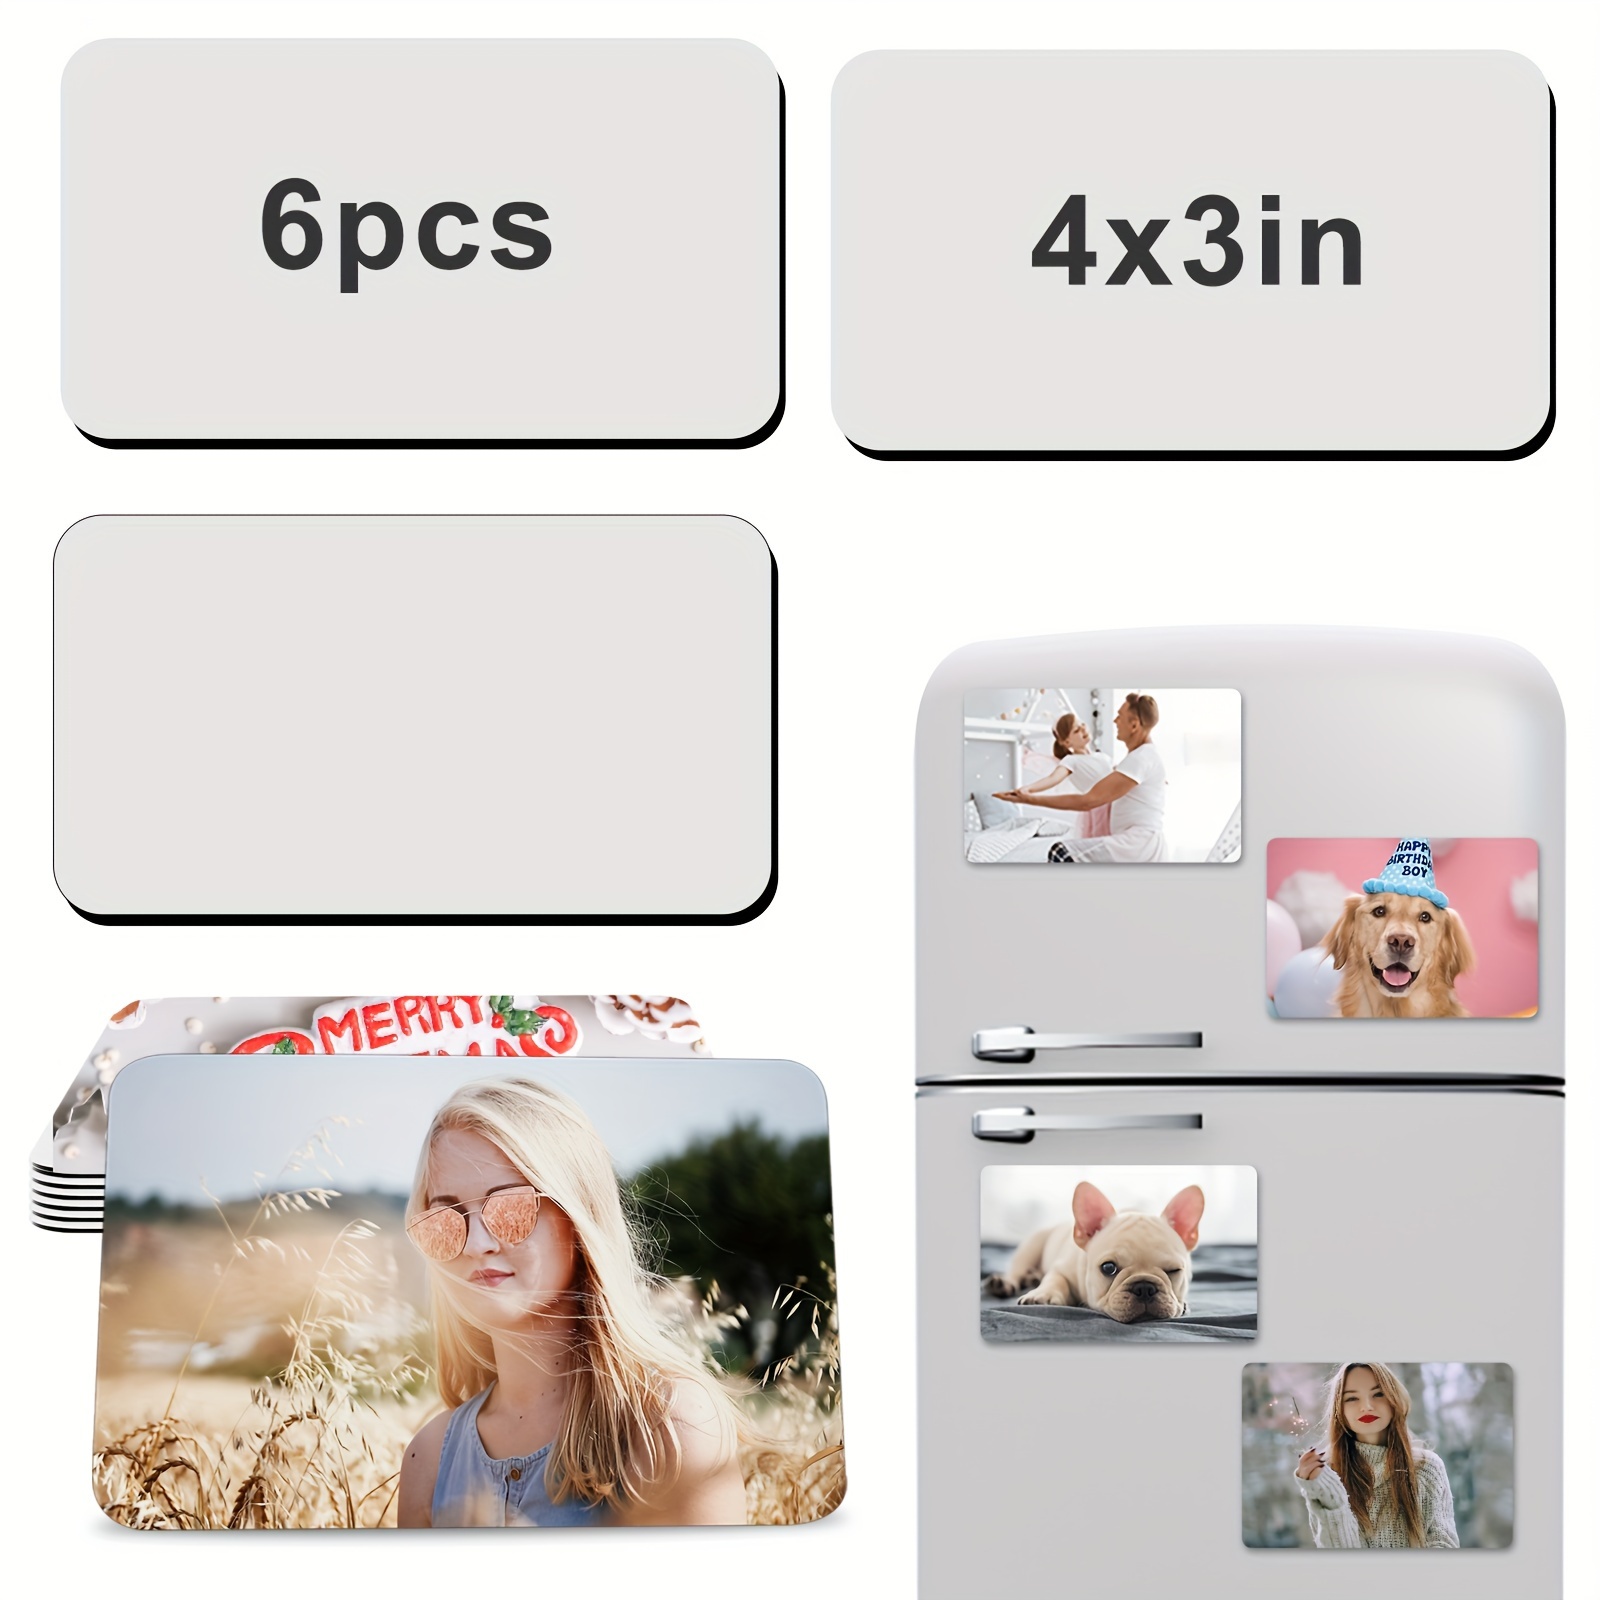 Xuhal 30 Pcs Sublimation Magnets Blanks Car Sublimation Blank Magnets Bulks  DIY Decorative Magnets for Home Kitchen Refrigerator Microwave Oven Wall